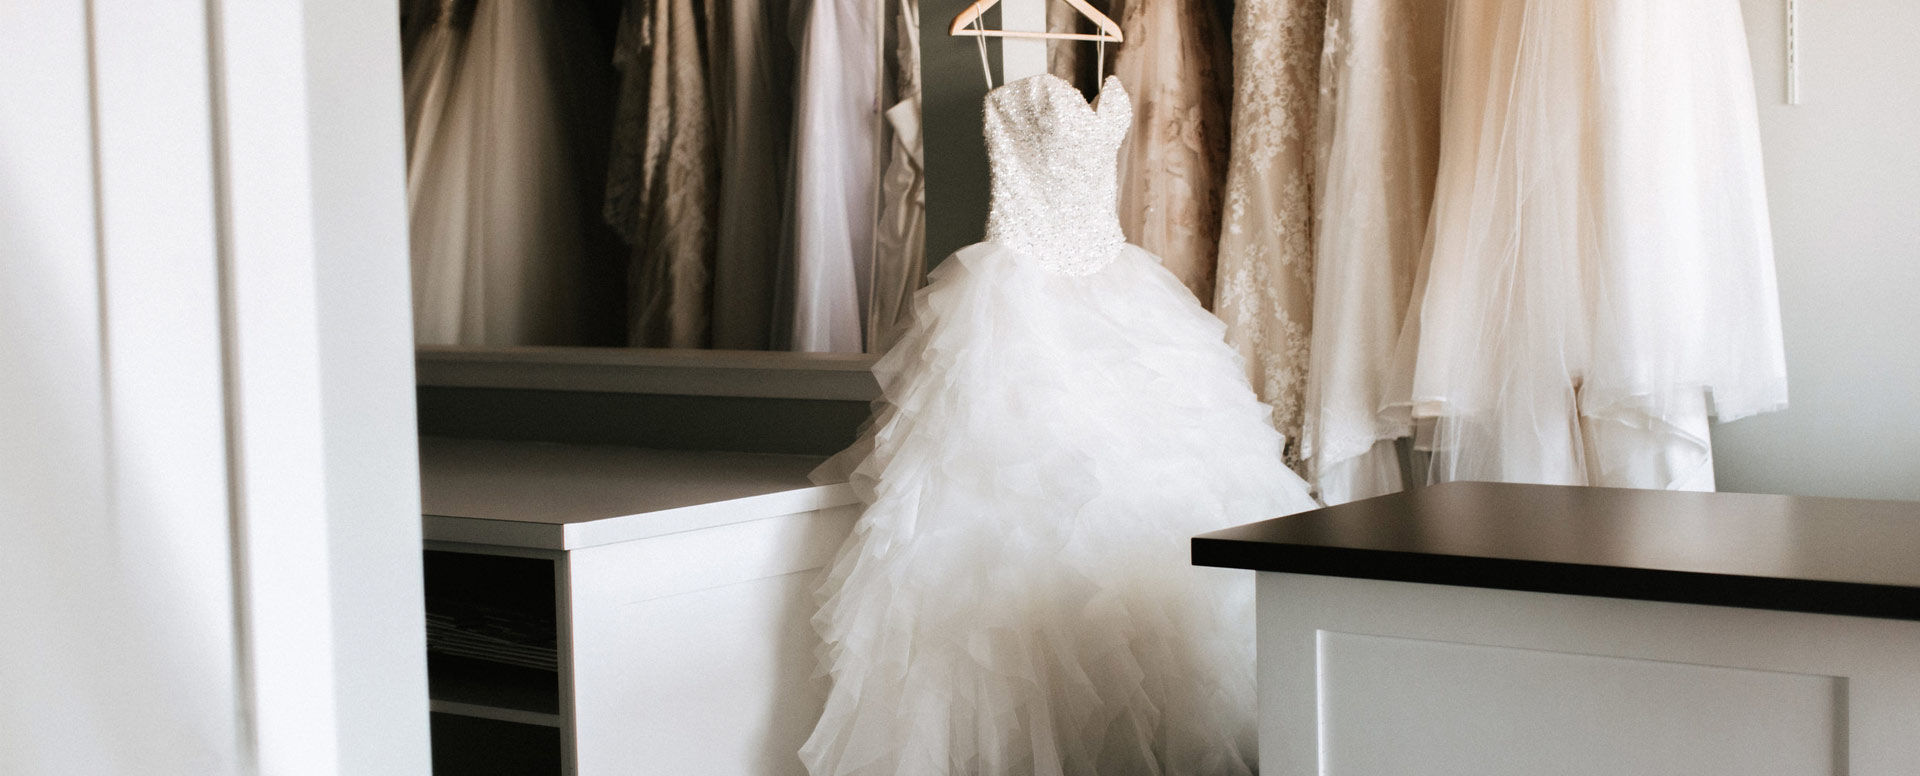 Wedding Dress Cleaning, Preservation, & Alteration Toronto